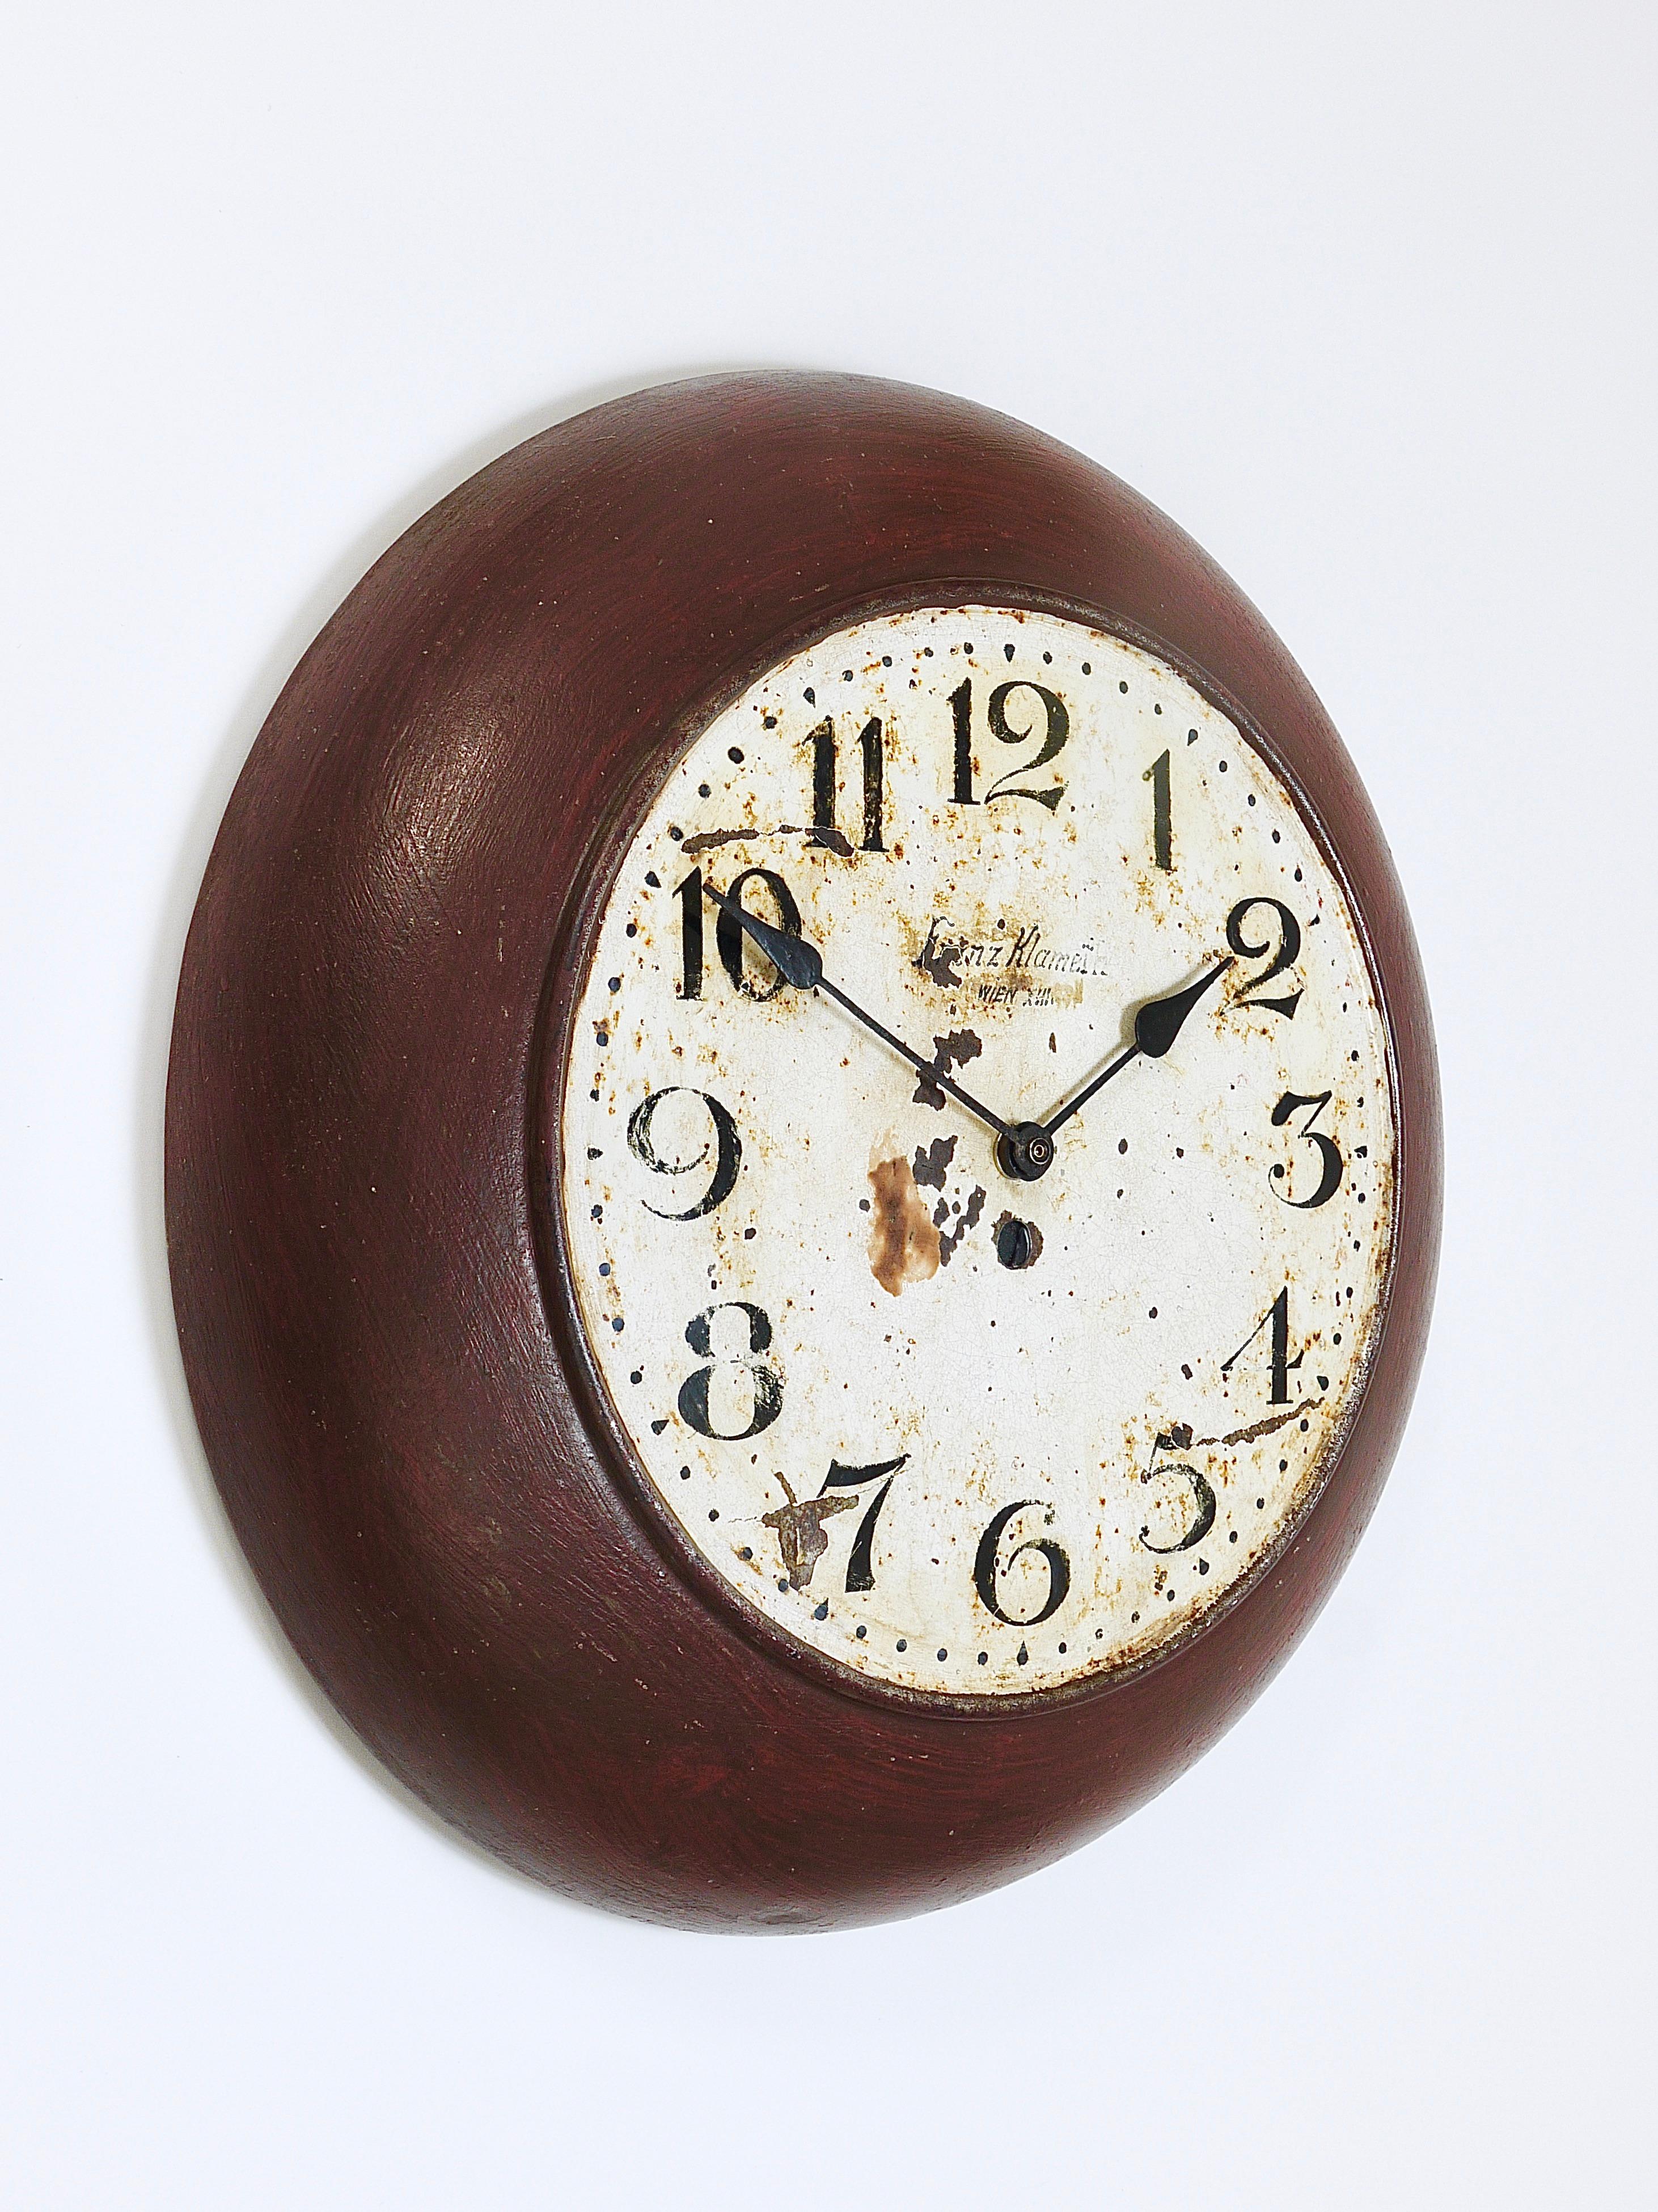 Antique 1920s Public Iron Wall Clock With Hand-Painted Dial, Industrial Style In Fair Condition For Sale In Vienna, AT